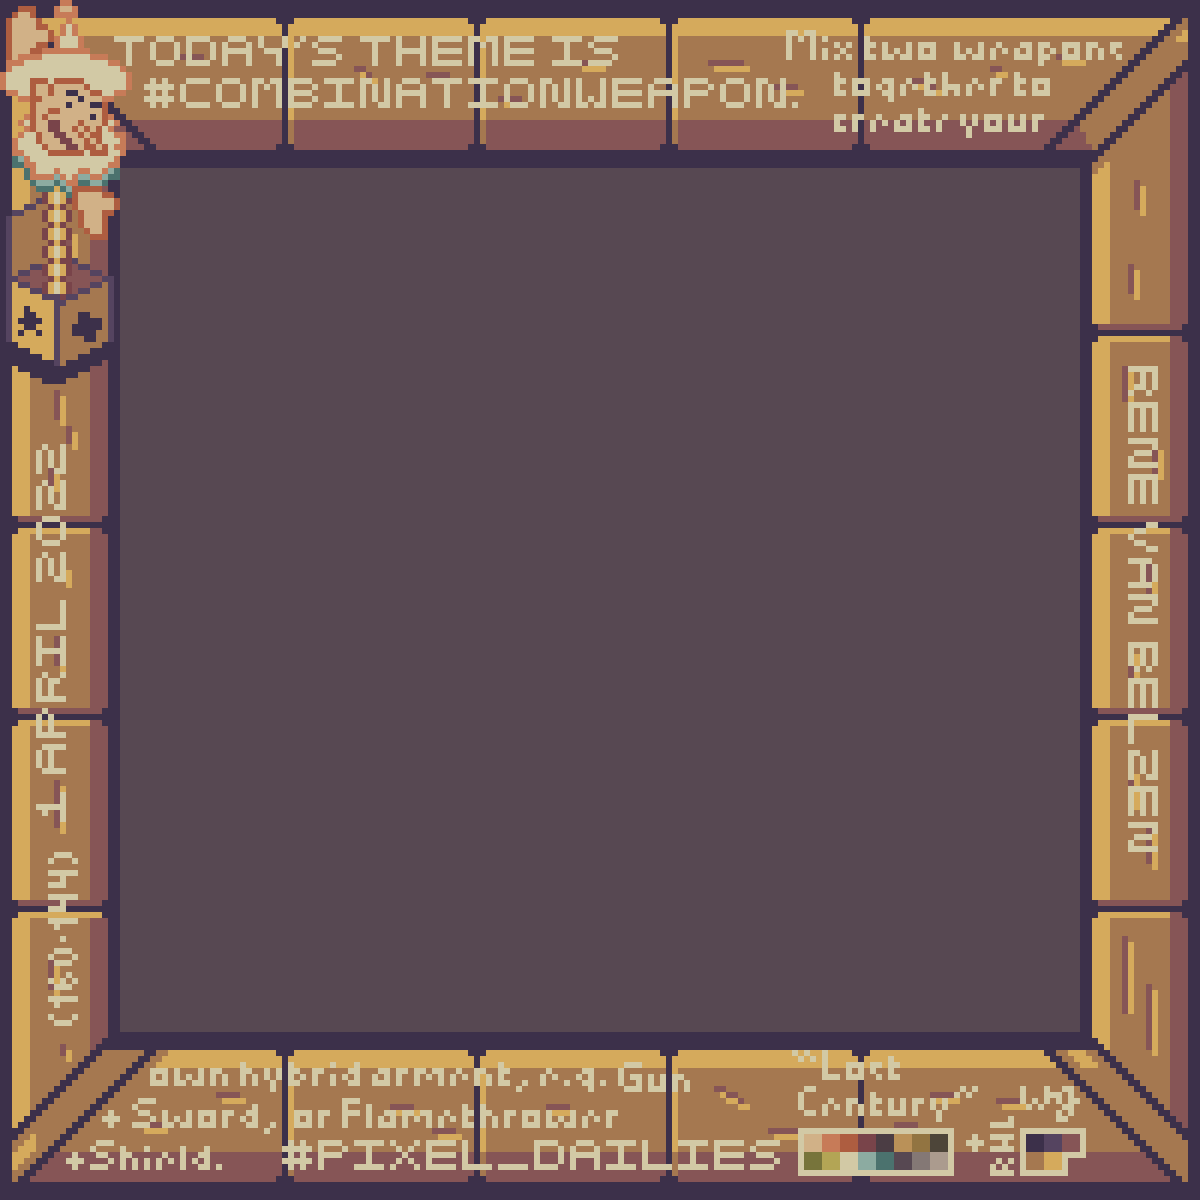 pixel art frame without content (work in progress)